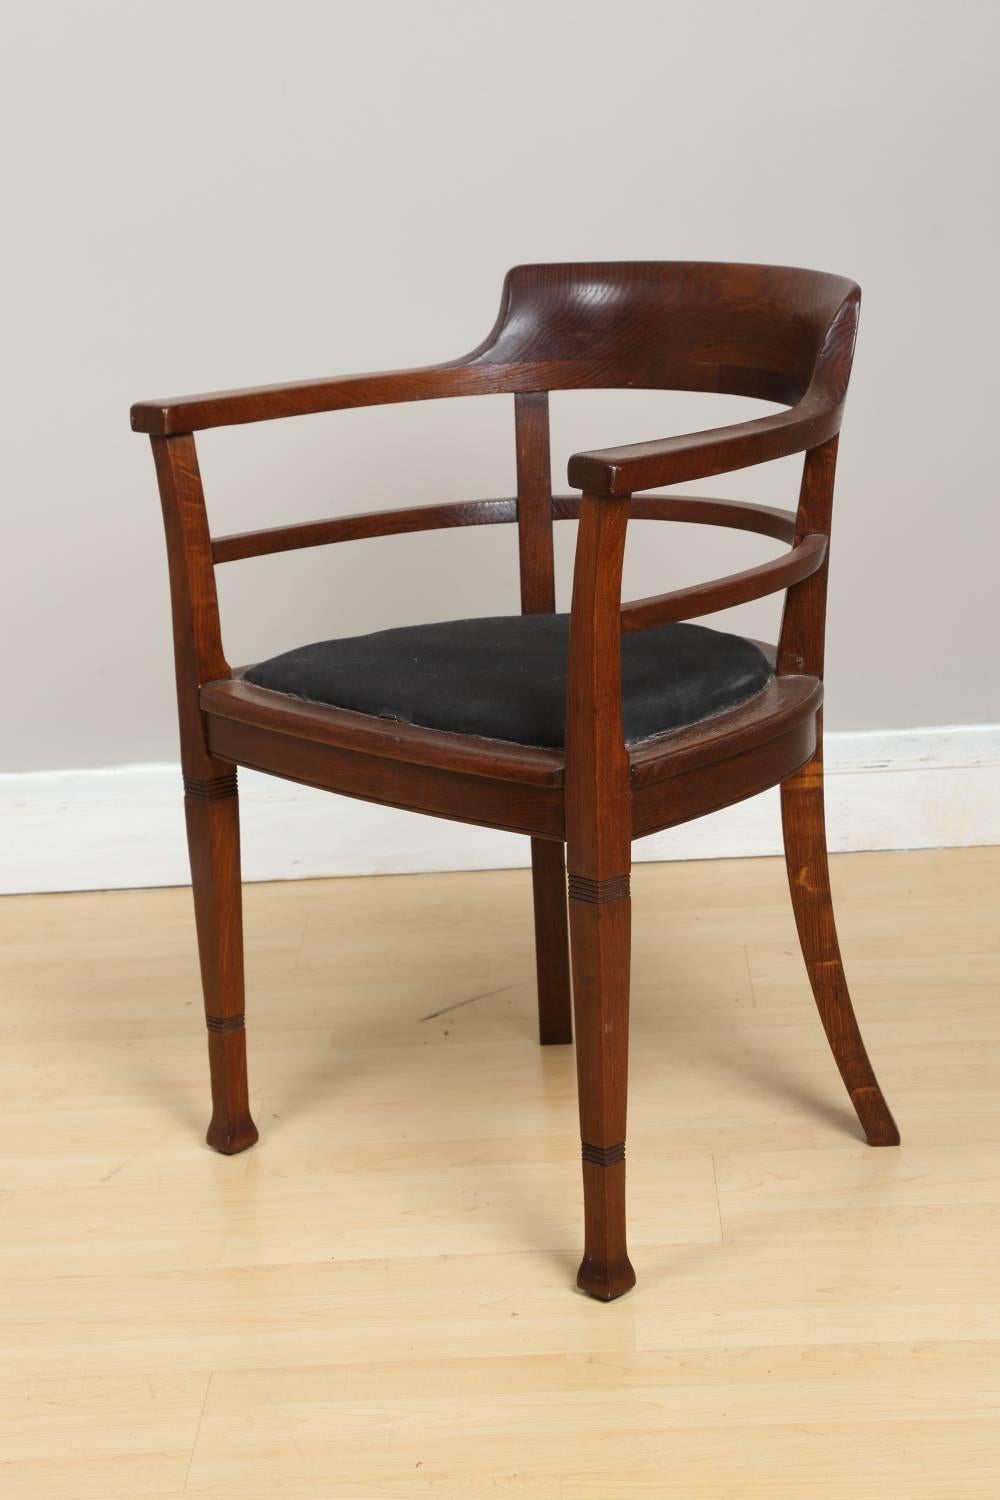 Oak desk chair, circa 1910. Elegant and comfortable oak desk chair from Germany, circa 1910. The chair has been restored and reupholstered. Measure: Seat height 18.5